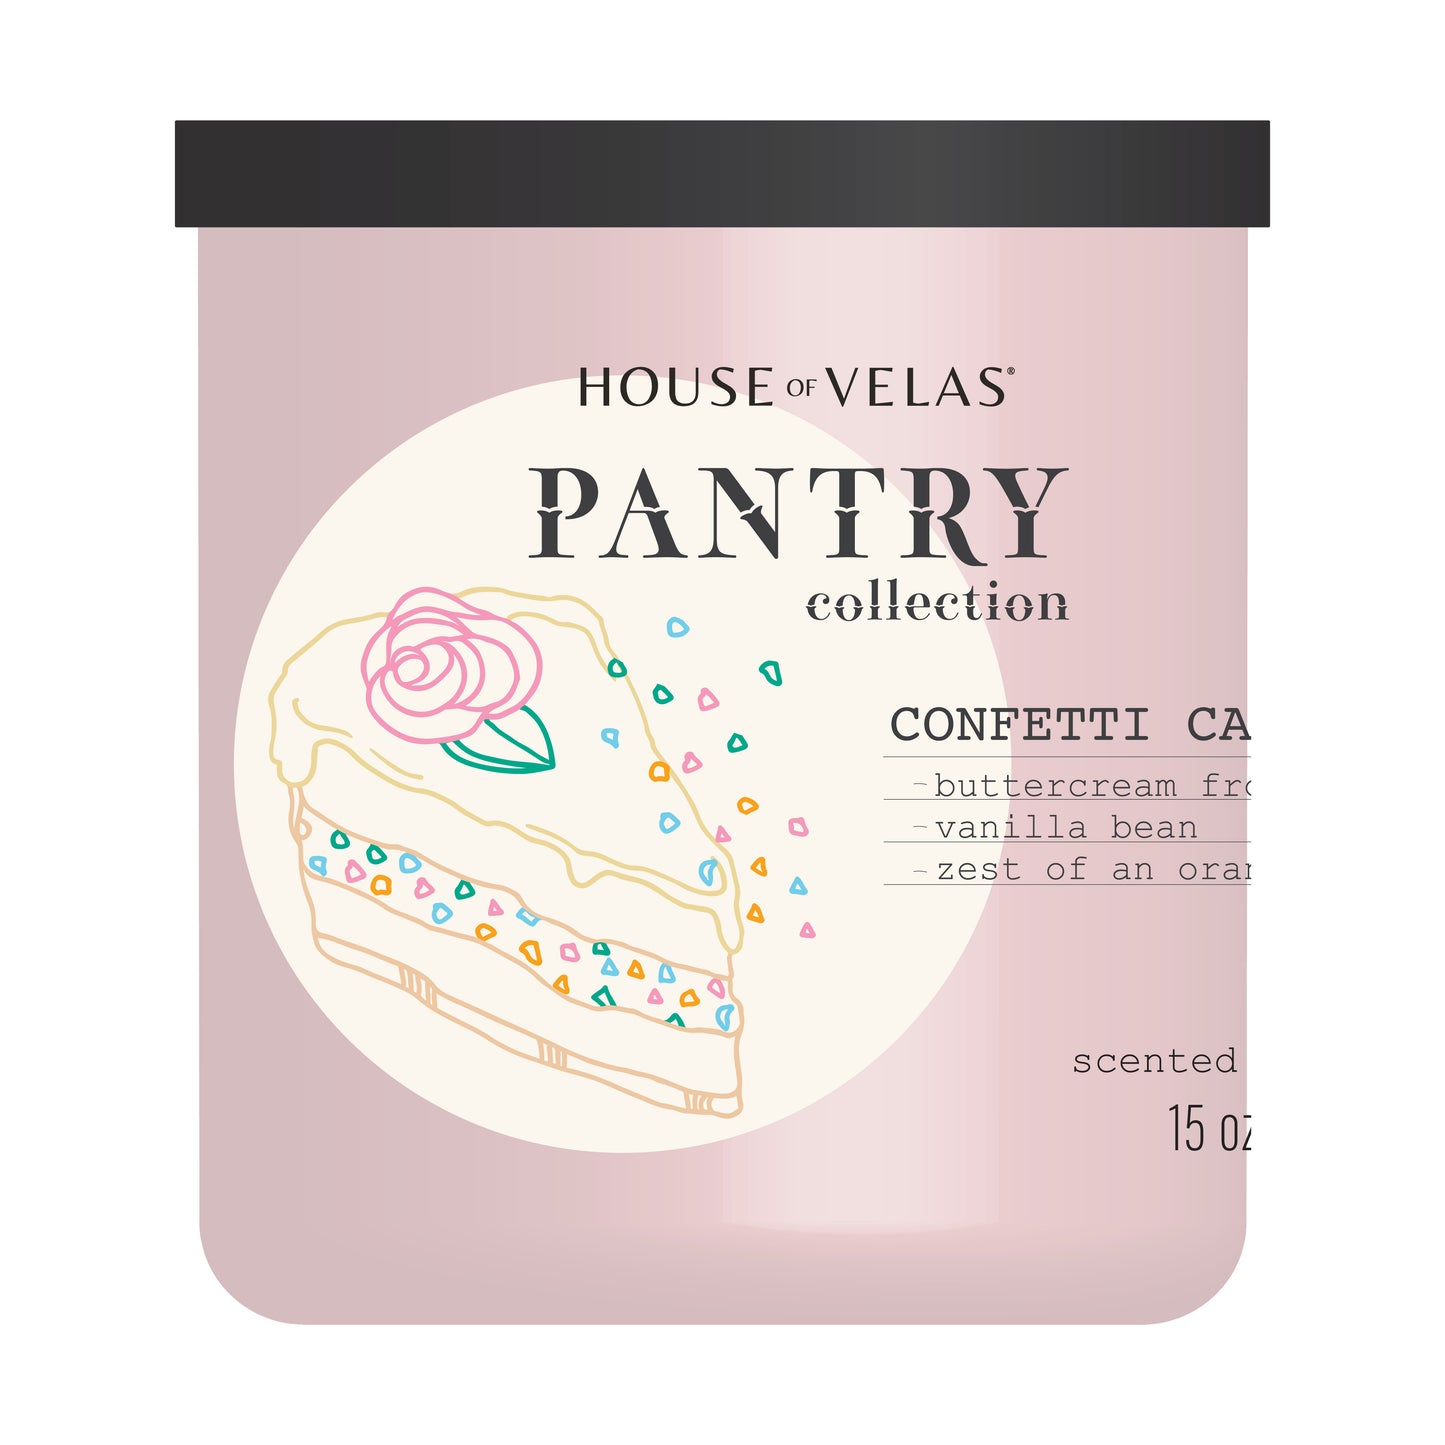 Pantry by House of Velas - Painted Glass 15 oz Scented Wax, Confetti Cake